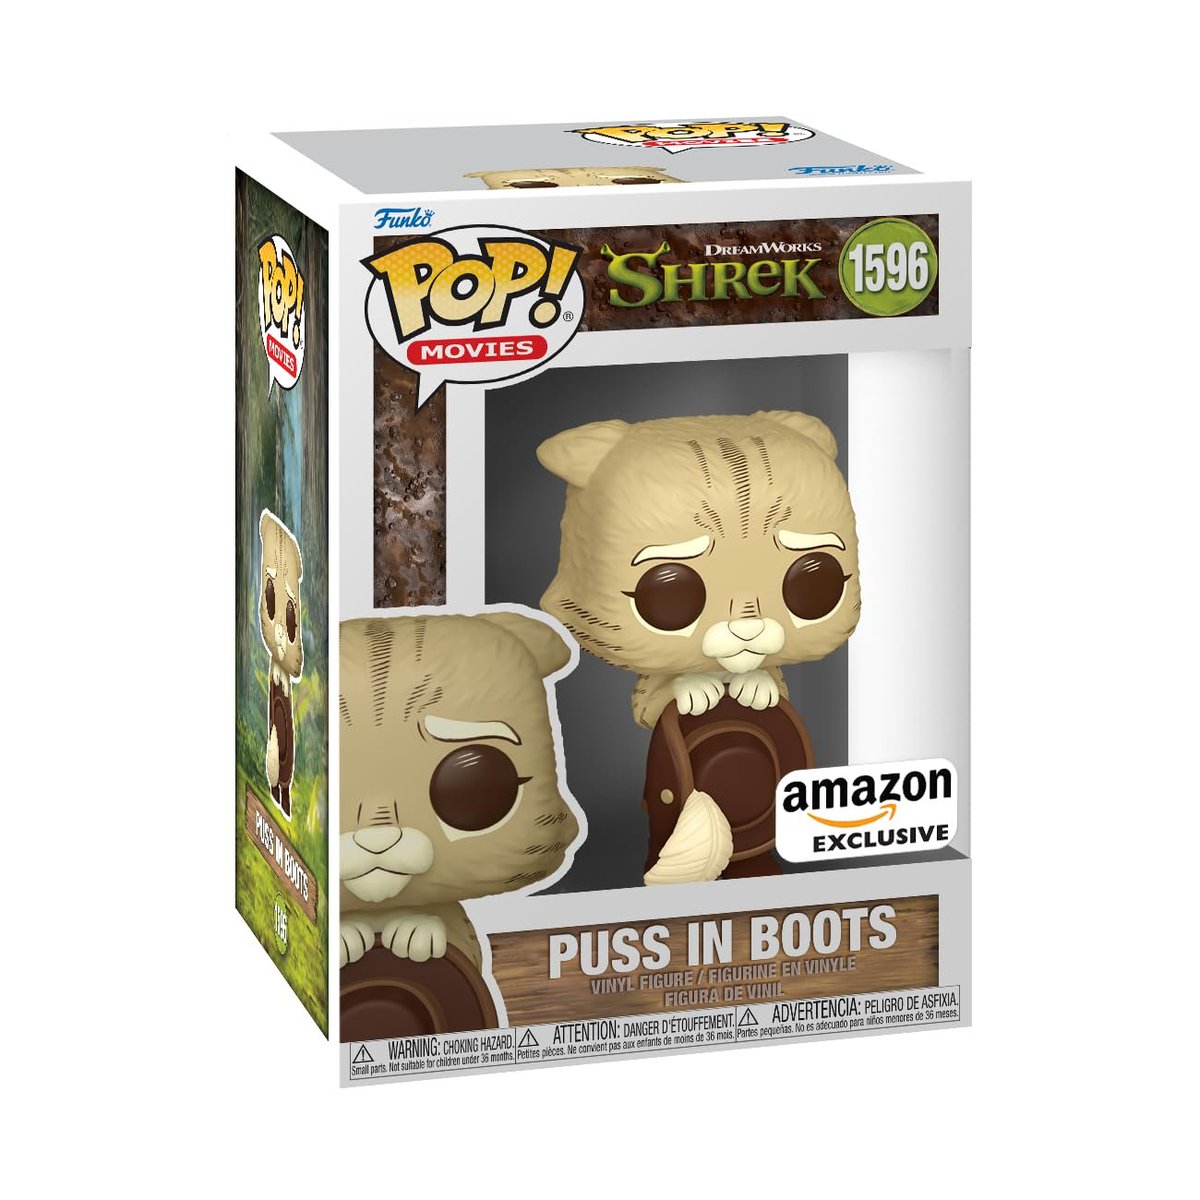 The Shrek Funko POPs and Plushies are now available for pre-order on Amazon, including an Amazon exclusive version of the Puss in Boots POP! The POPs release on June 17th and the plushies release on August 24th. Link: amzn.to/44tBBJb